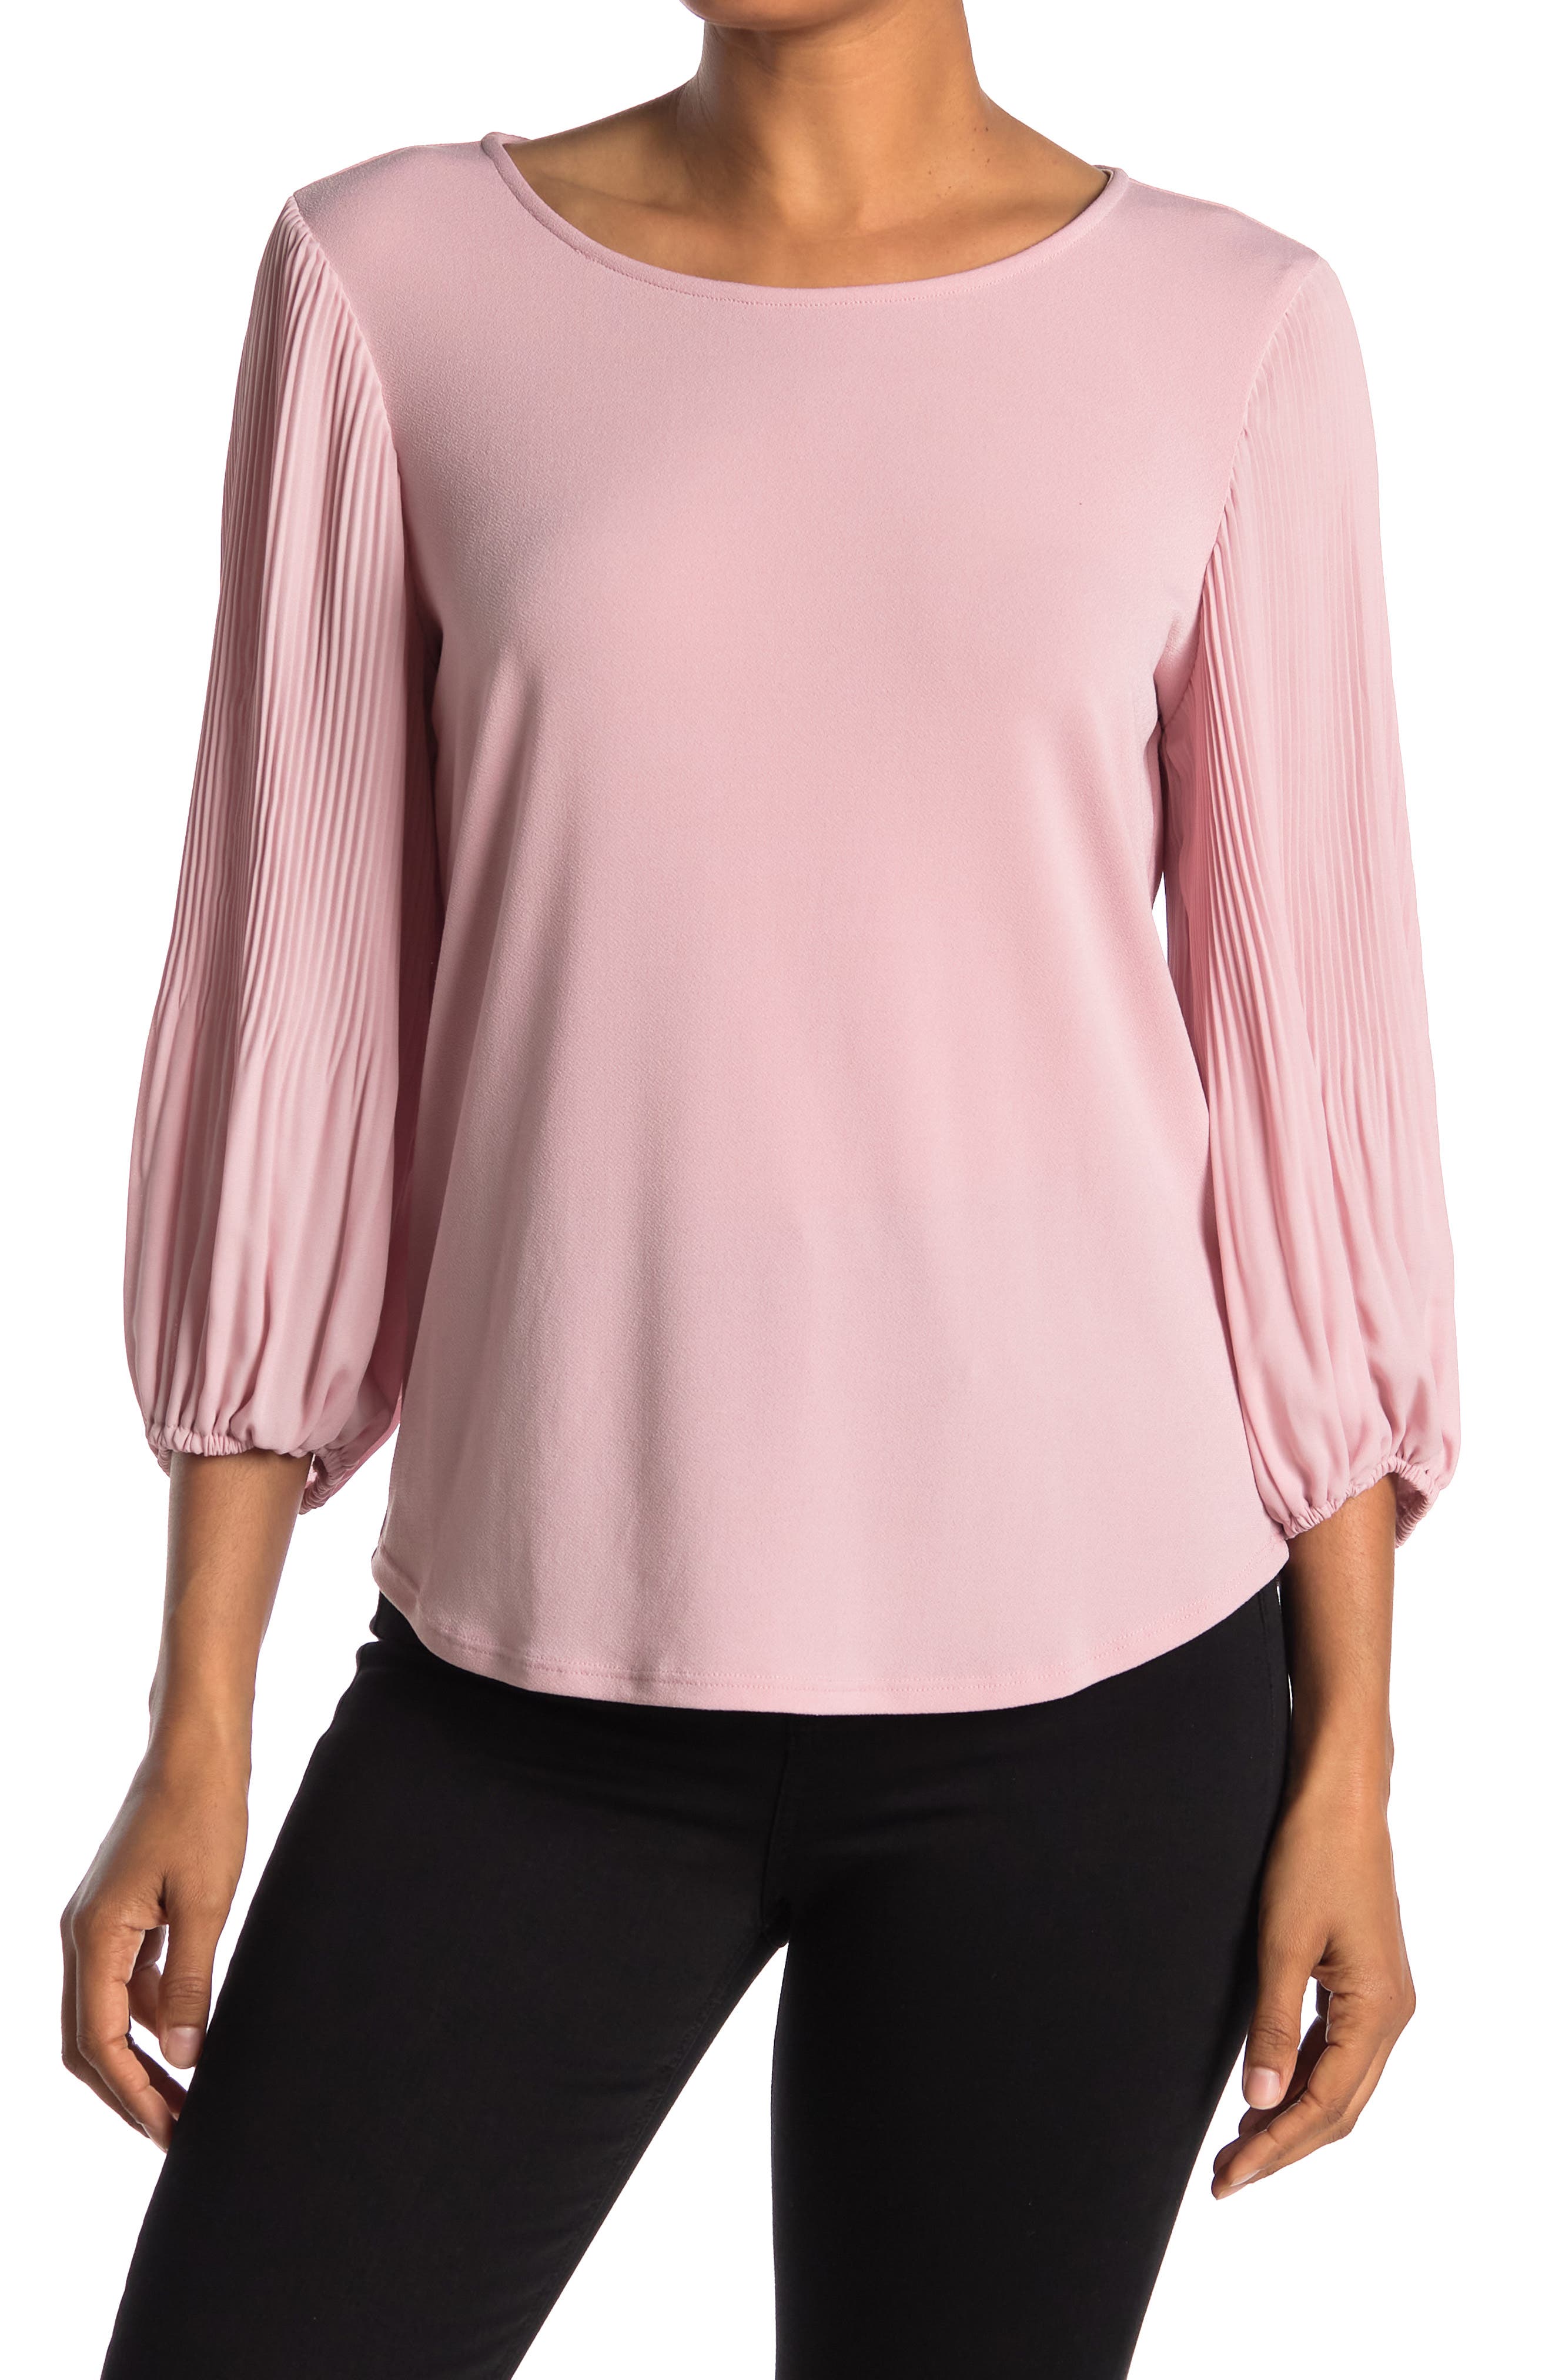 Adrianna Papell Solid Moss Crepe Pleat Woven Top In Light/pastel Pink2